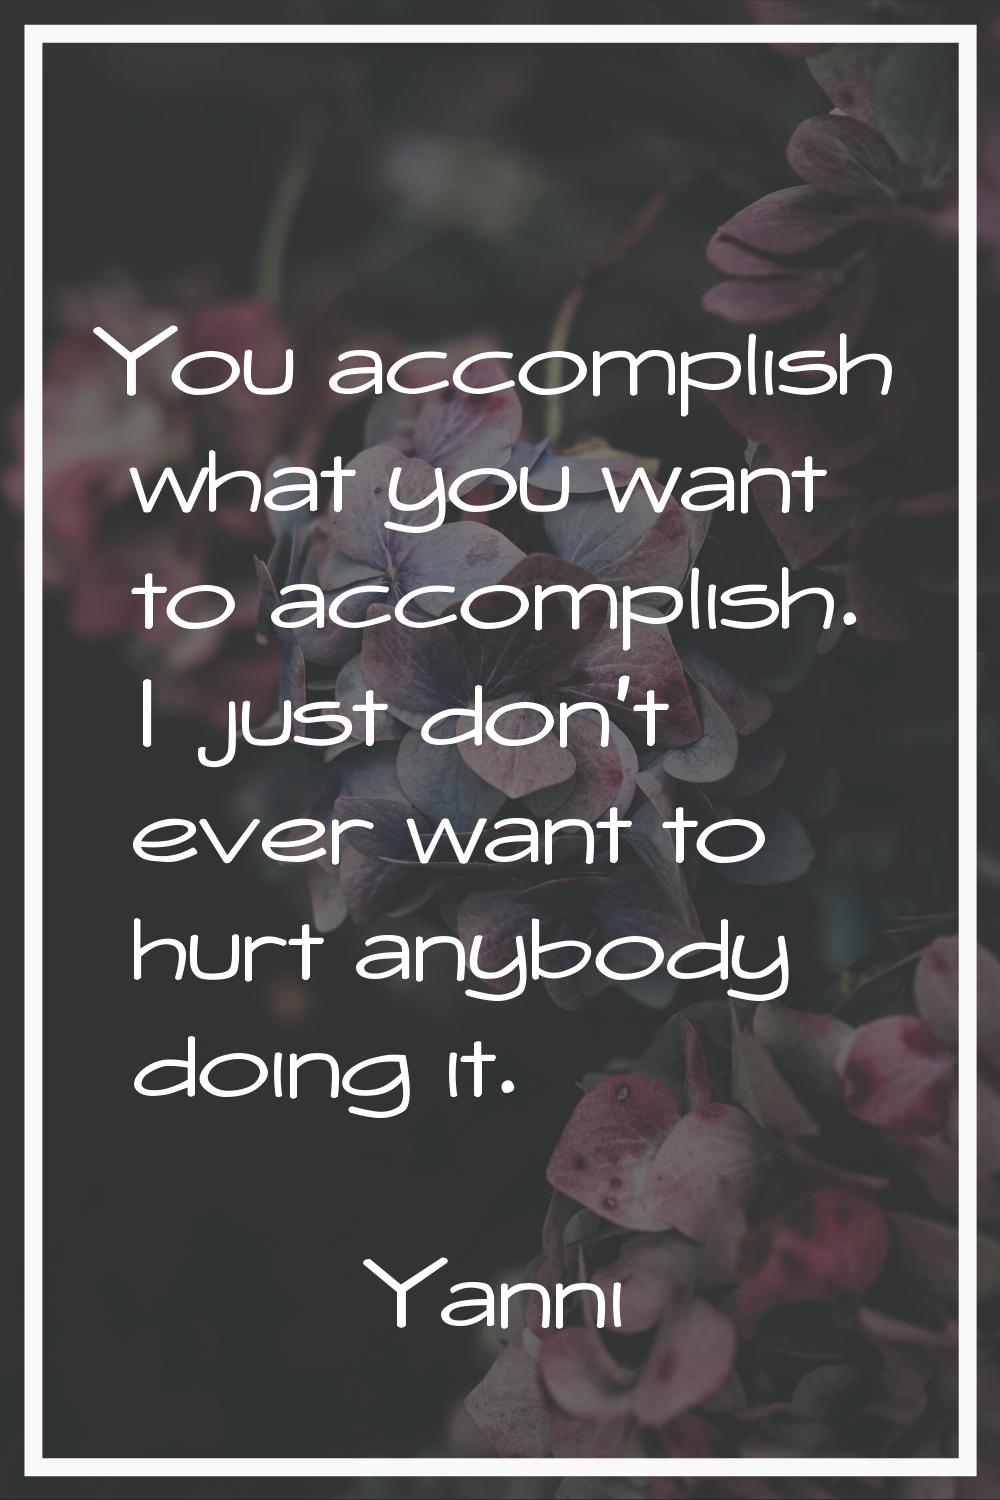 You accomplish what you want to accomplish. I just don't ever want to hurt anybody doing it.